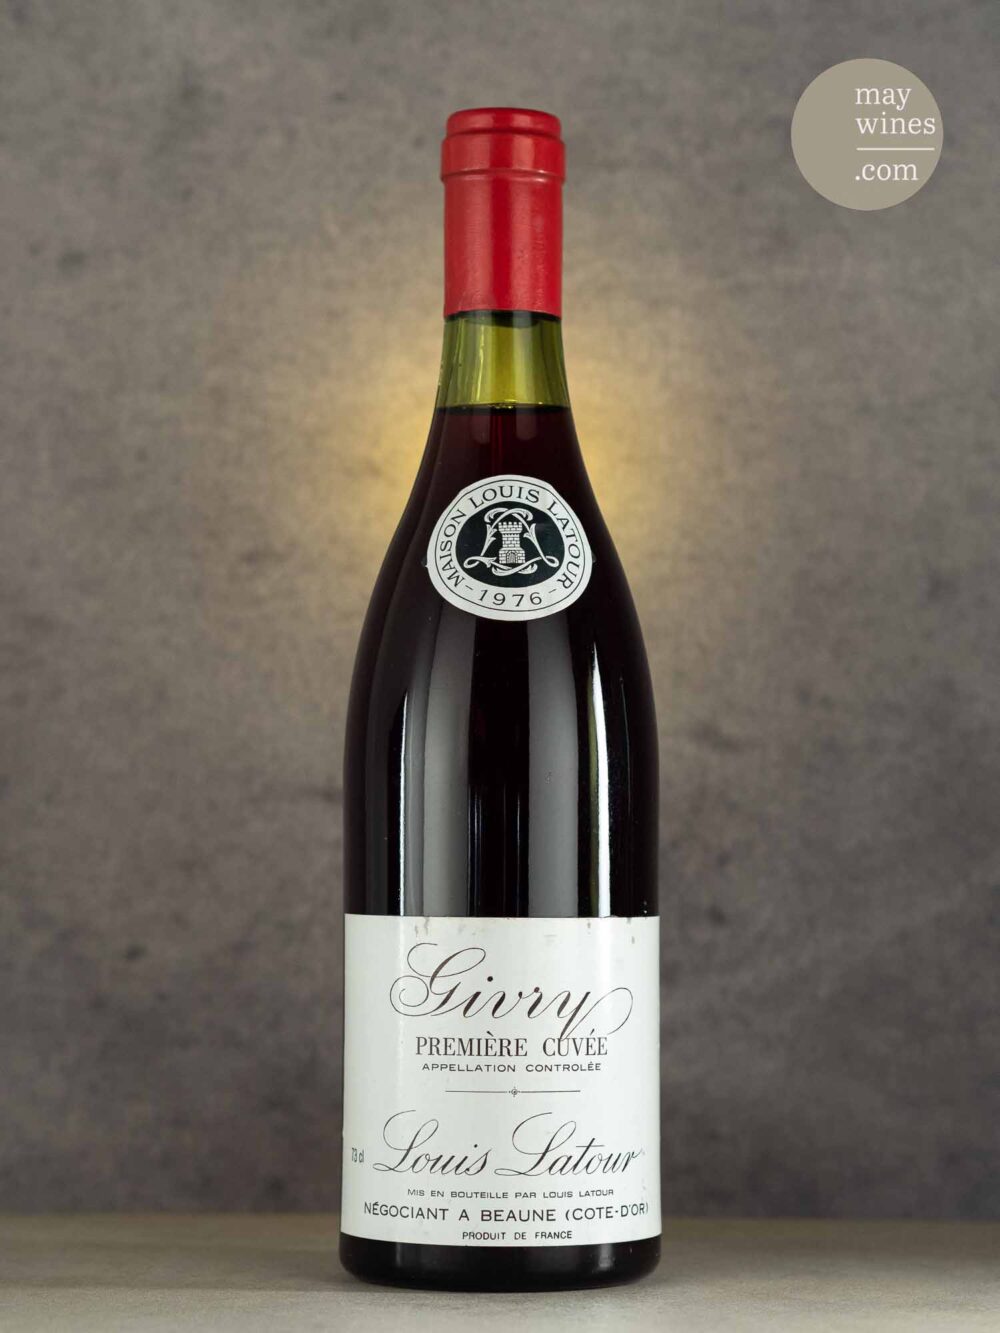 May Wines – Rotwein – 1976 Givry - Première Cuvée - Domaine Louis Latour